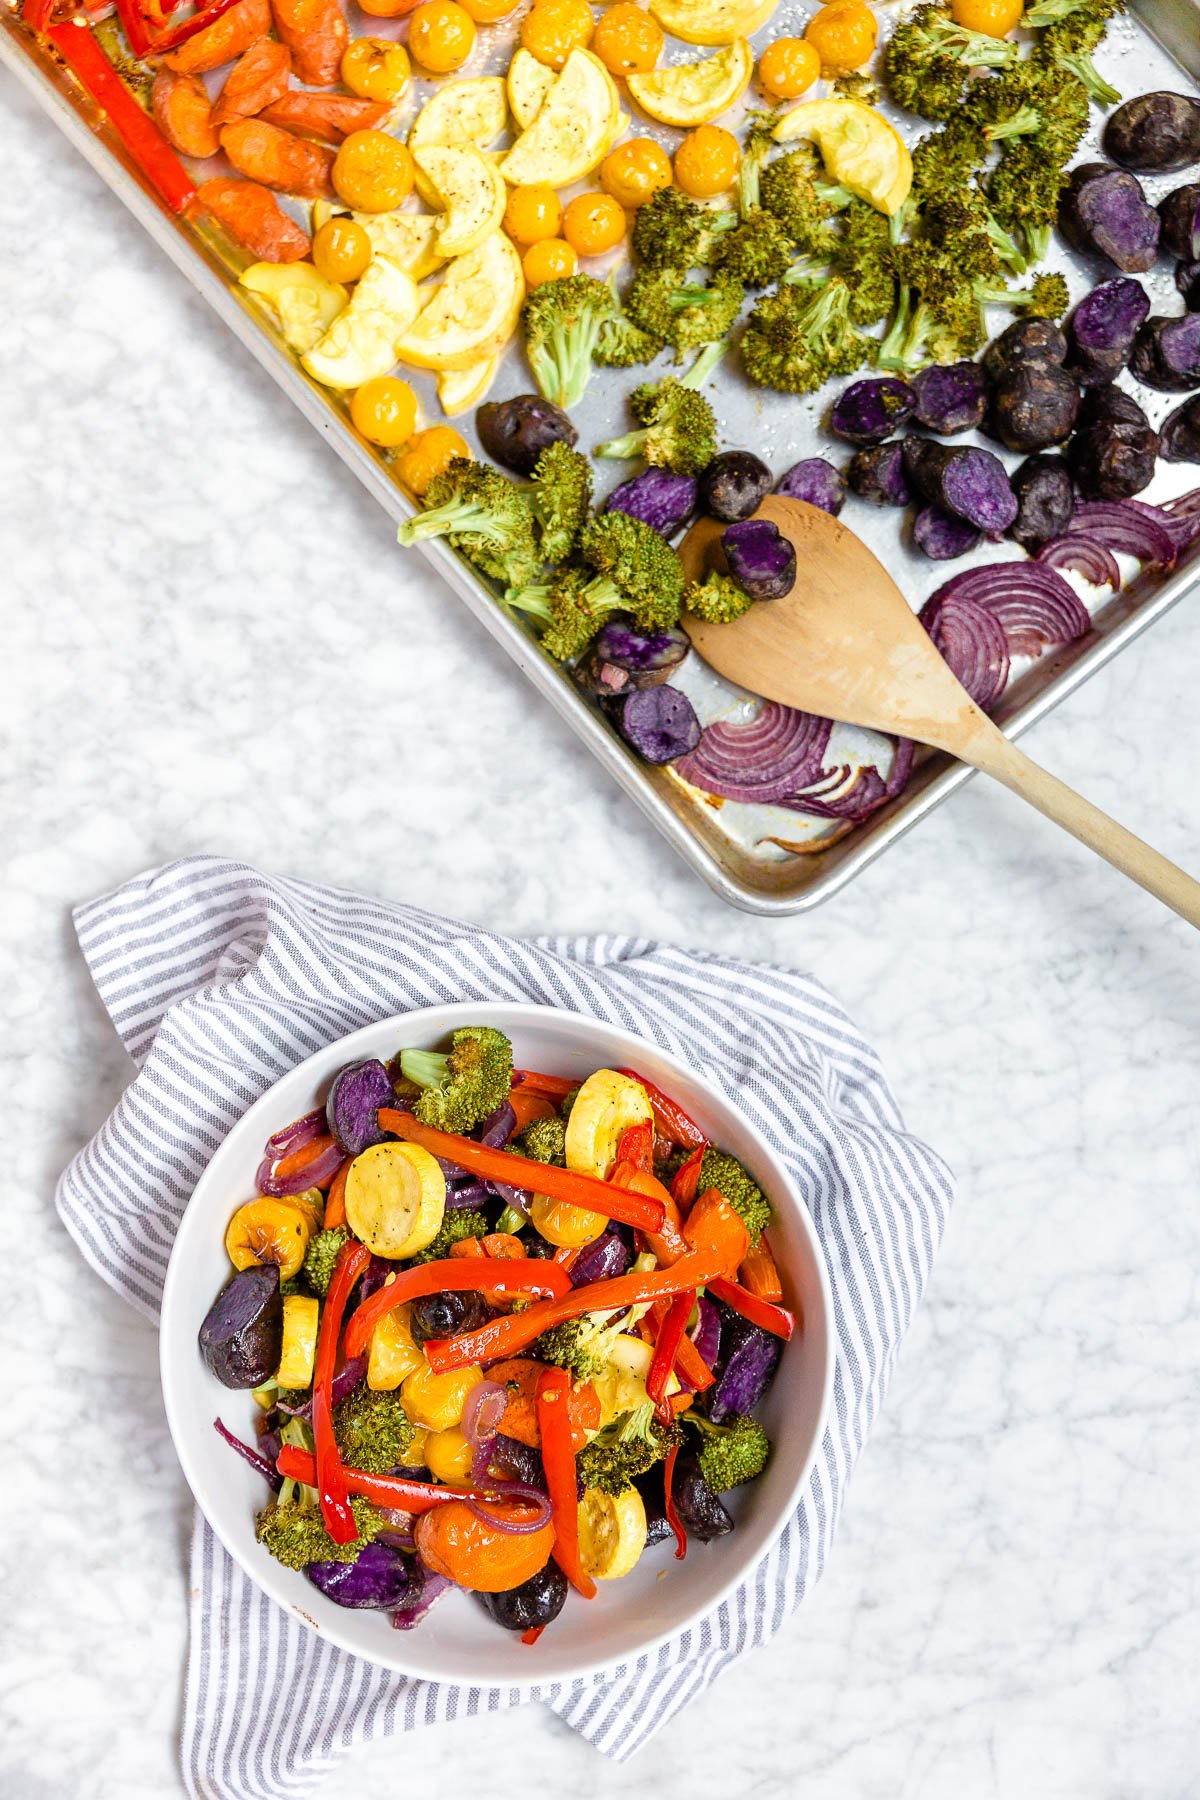 A sheet pan with rainbow vegetables that were roasted in the oven with a wooden spoon and a bowl with zucchini, tomatoes, broccoli, purple potatoes, bell peppers and carrots in it.